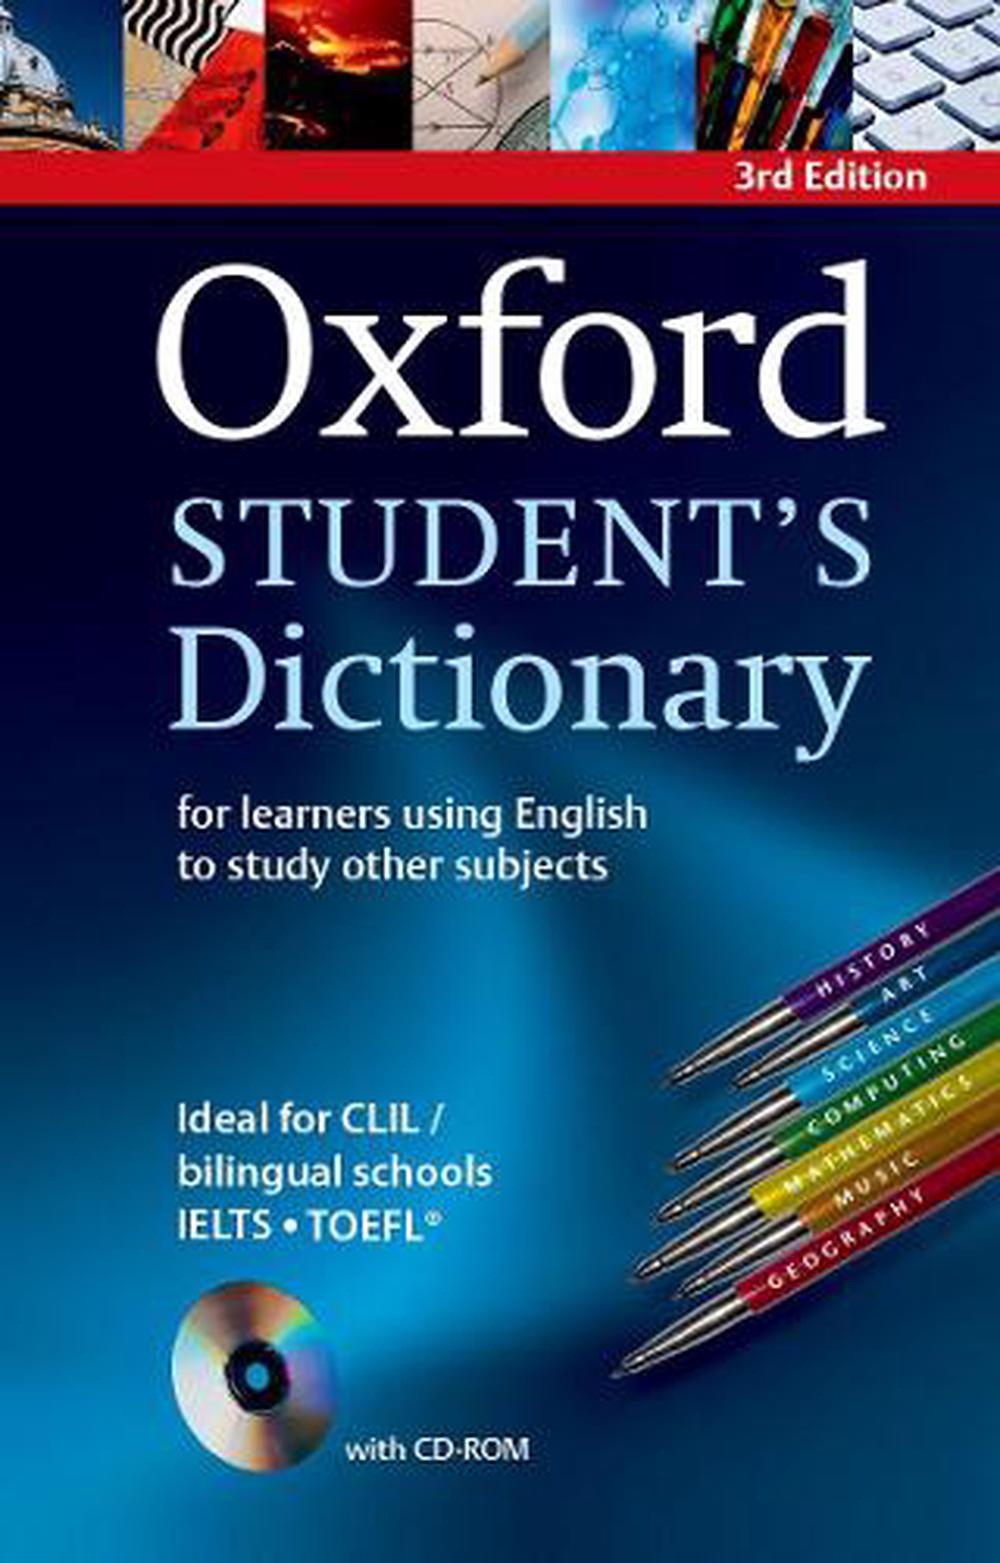 Oxford Student's Dictionary Paperback with CDROM by Oxford Dictionary